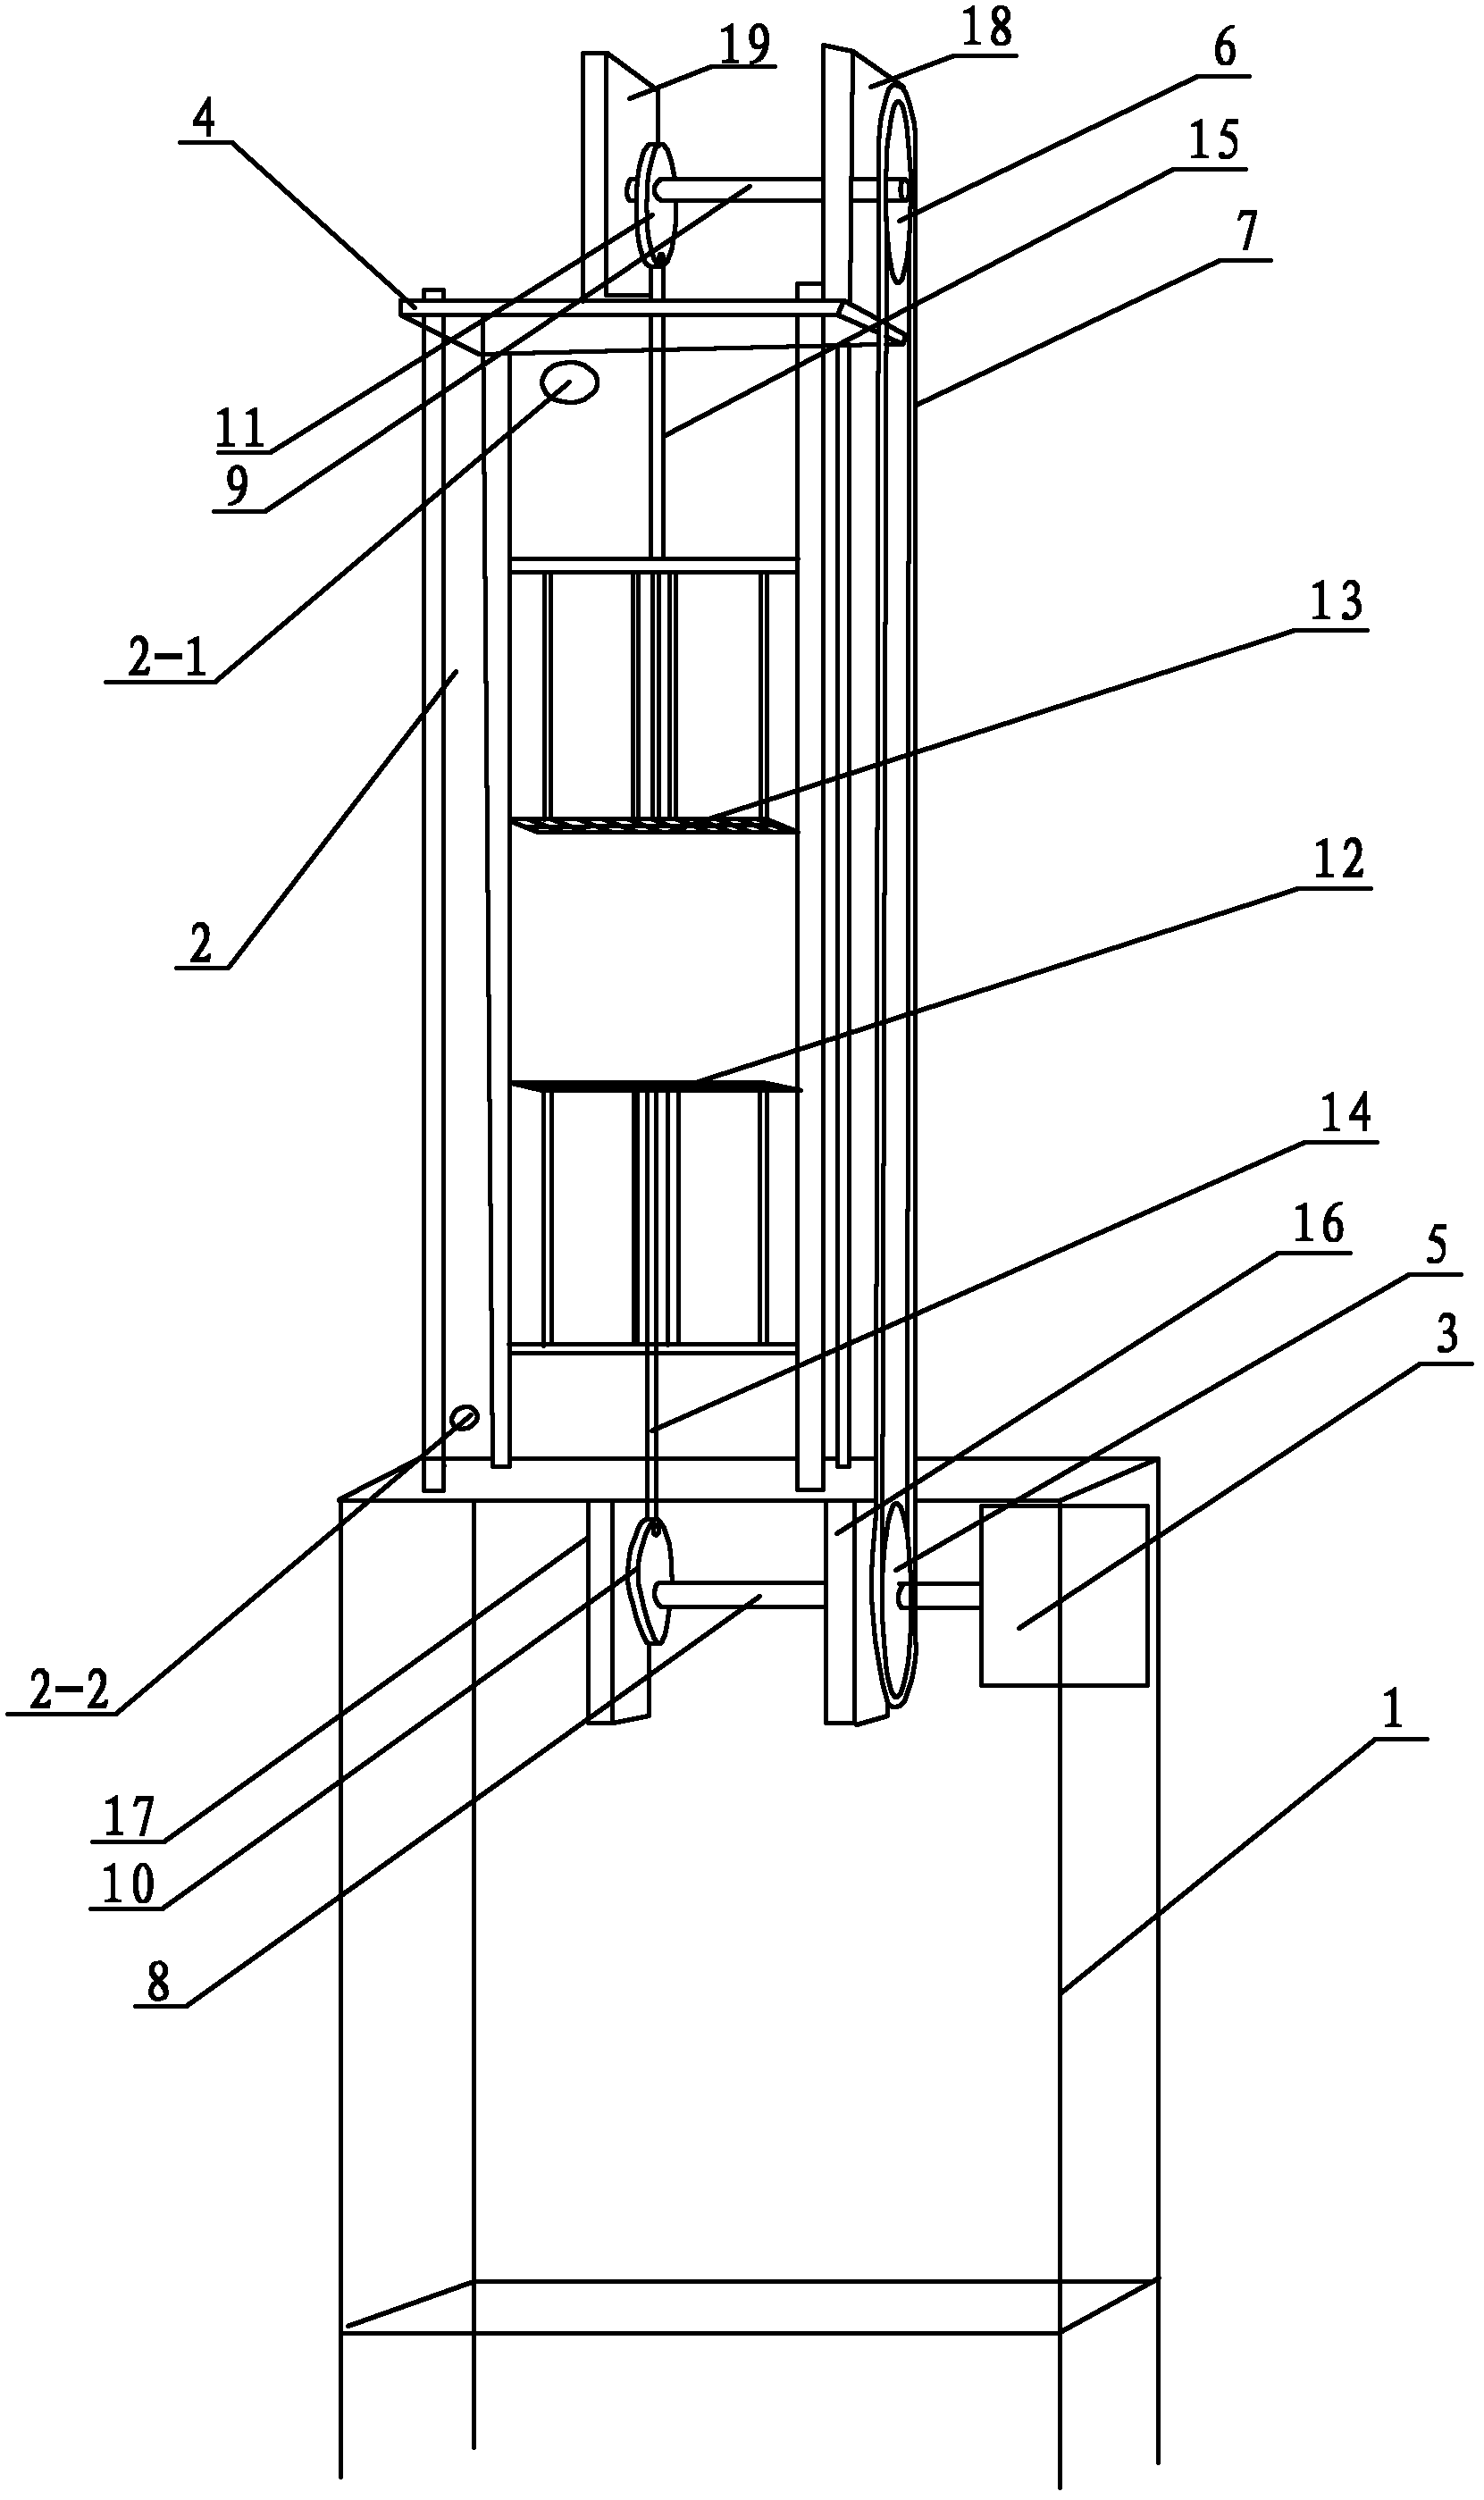 Forced isotropic turbulence experimental apparatus